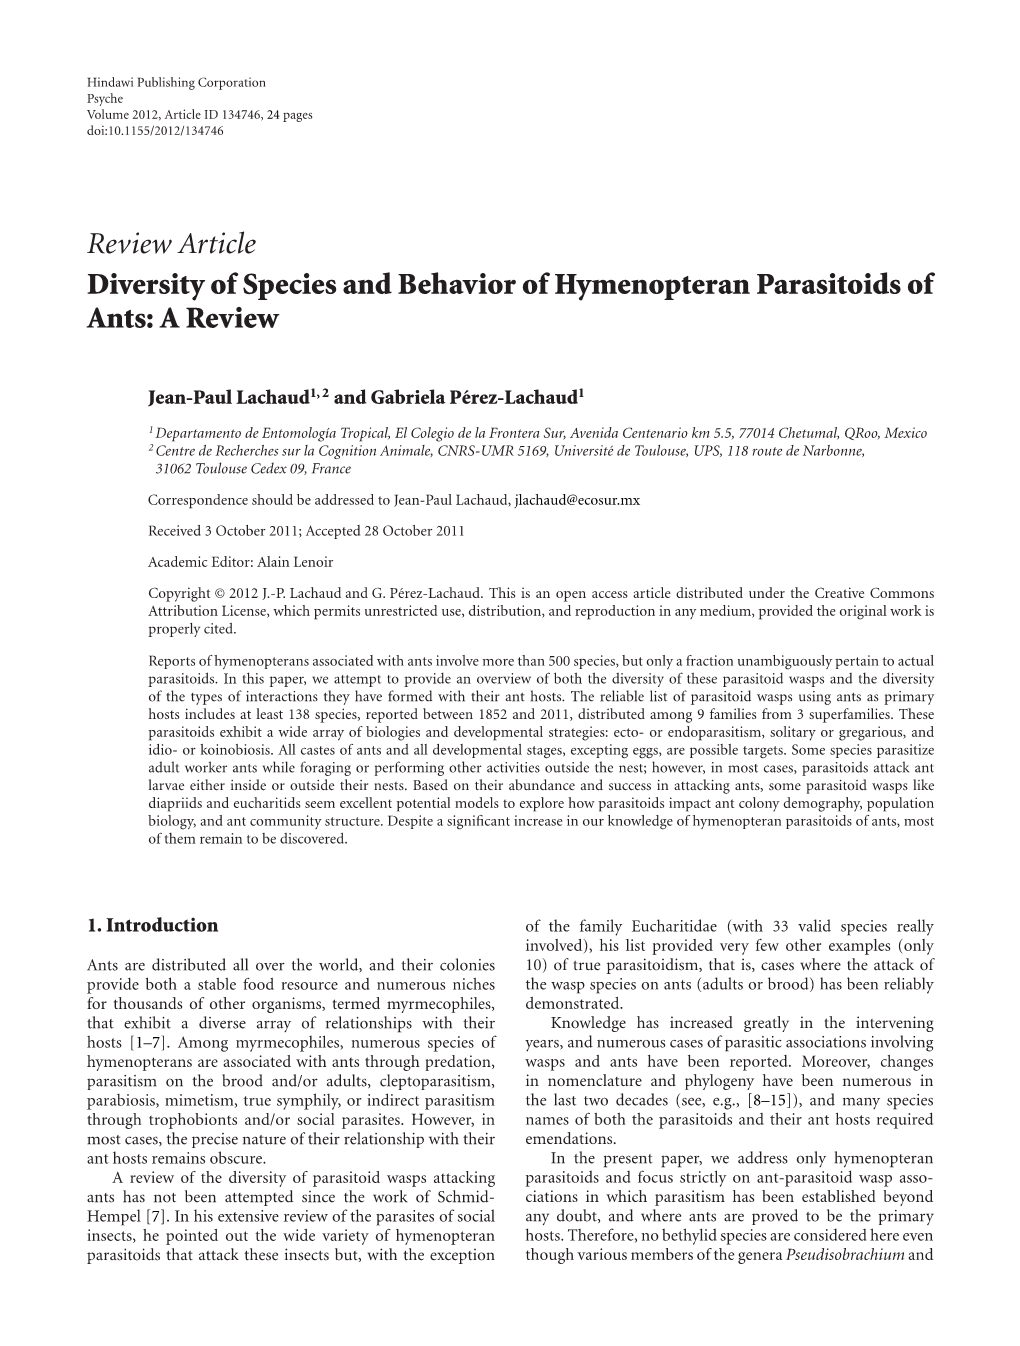 Review Article Diversity of Species and Behavior of Hymenopteran Parasitoids of Ants: a Review